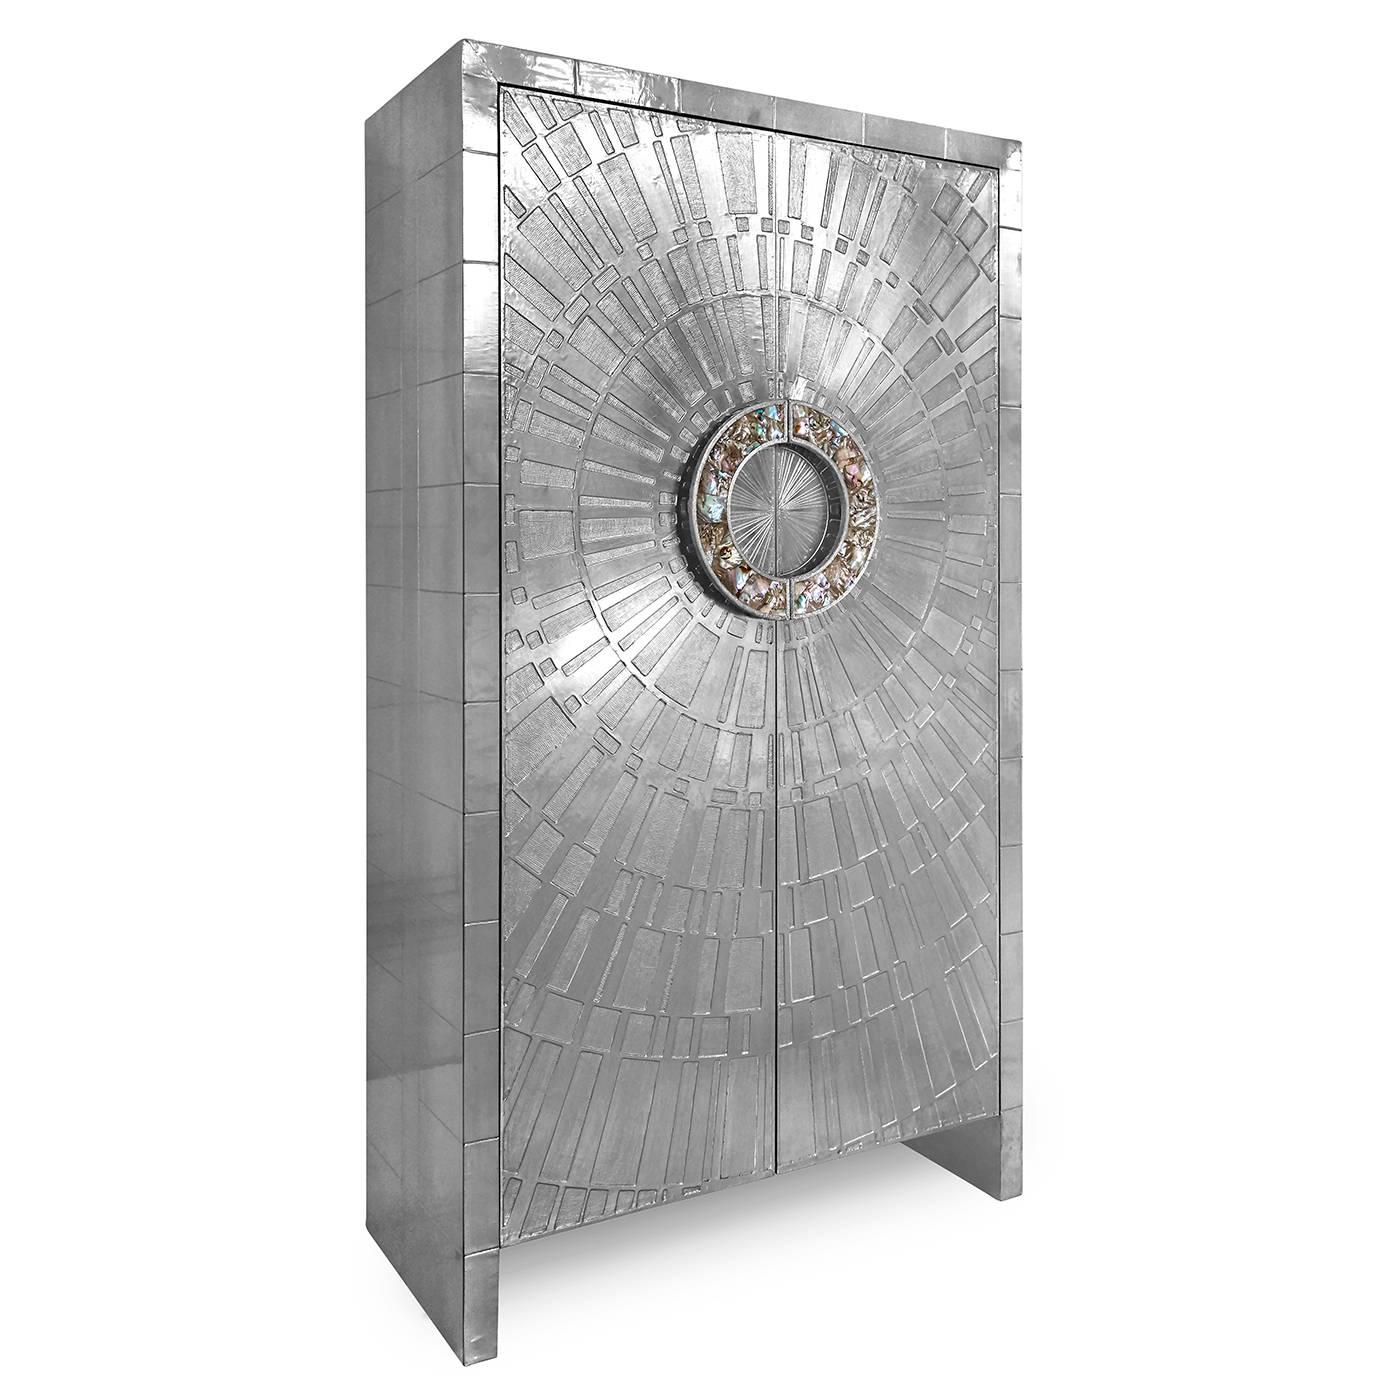 Global glamour. Crafted from nickel-plated metal with hand-stamped patterns applied to Minimalist and modernist forms. The surface is reminiscent of silver leaf—it emits that same lustrous glow—but is wonderfully durable.

Our Talitha Armoire is